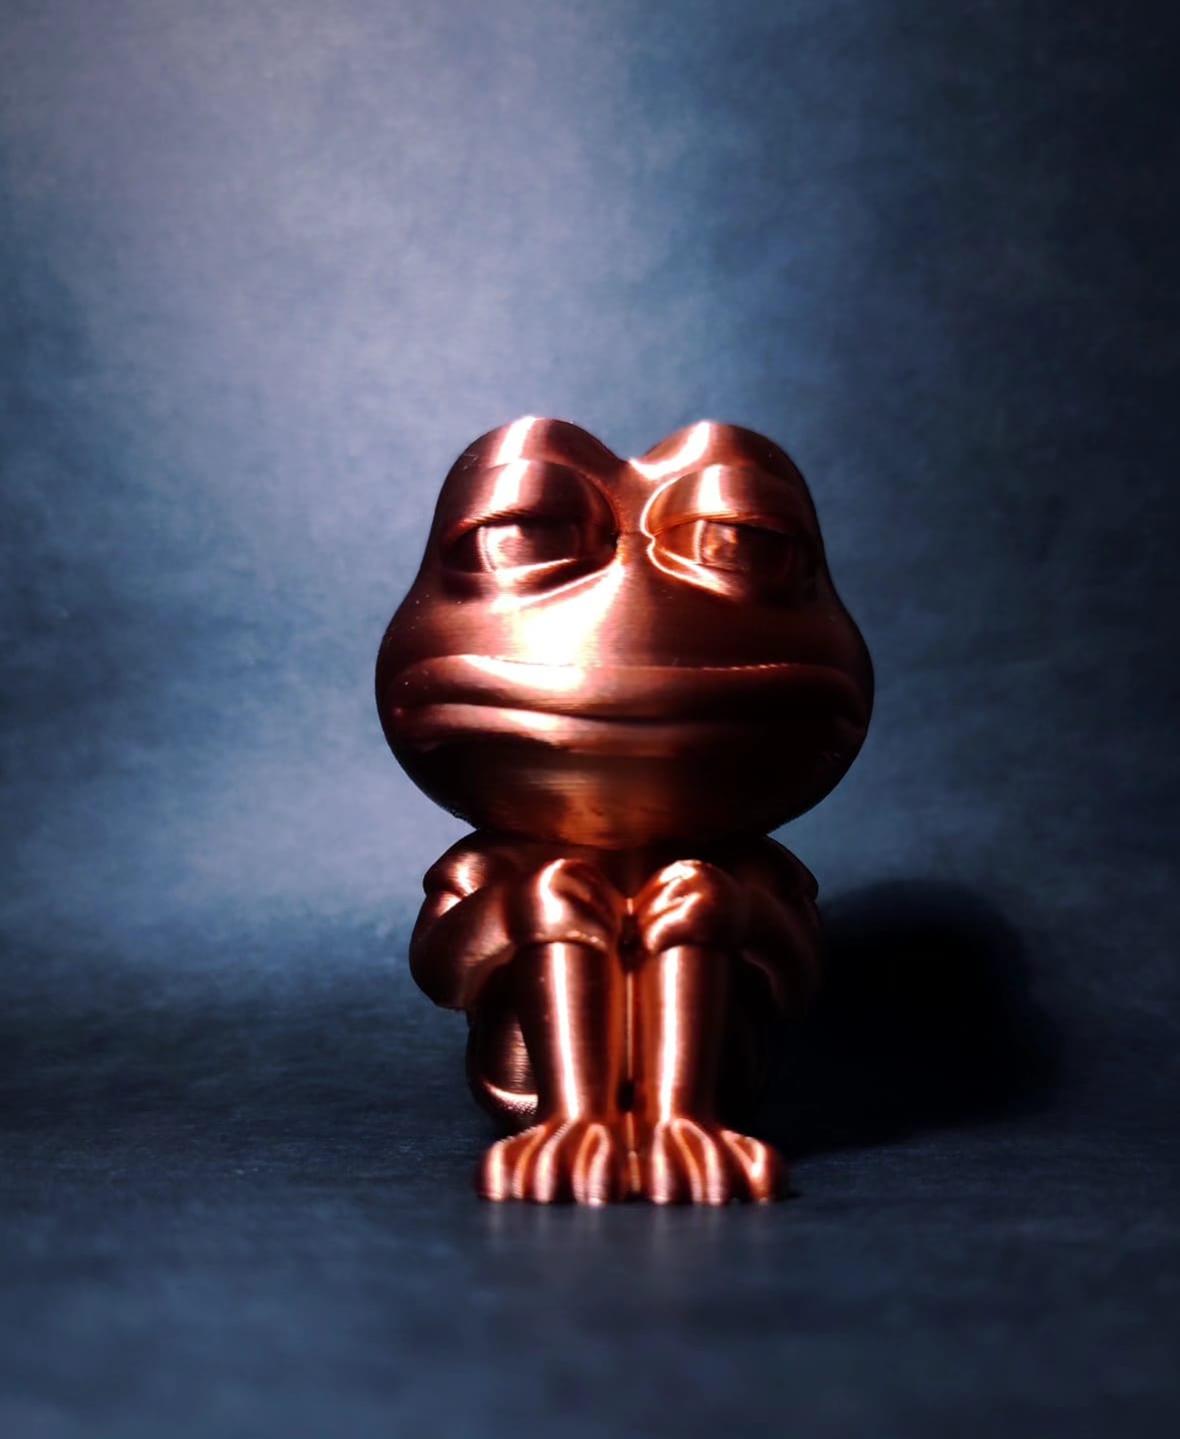 Pepe the frog - Awesome model!

Check my insta page @3Doodling for more makes! ;) - 3d model